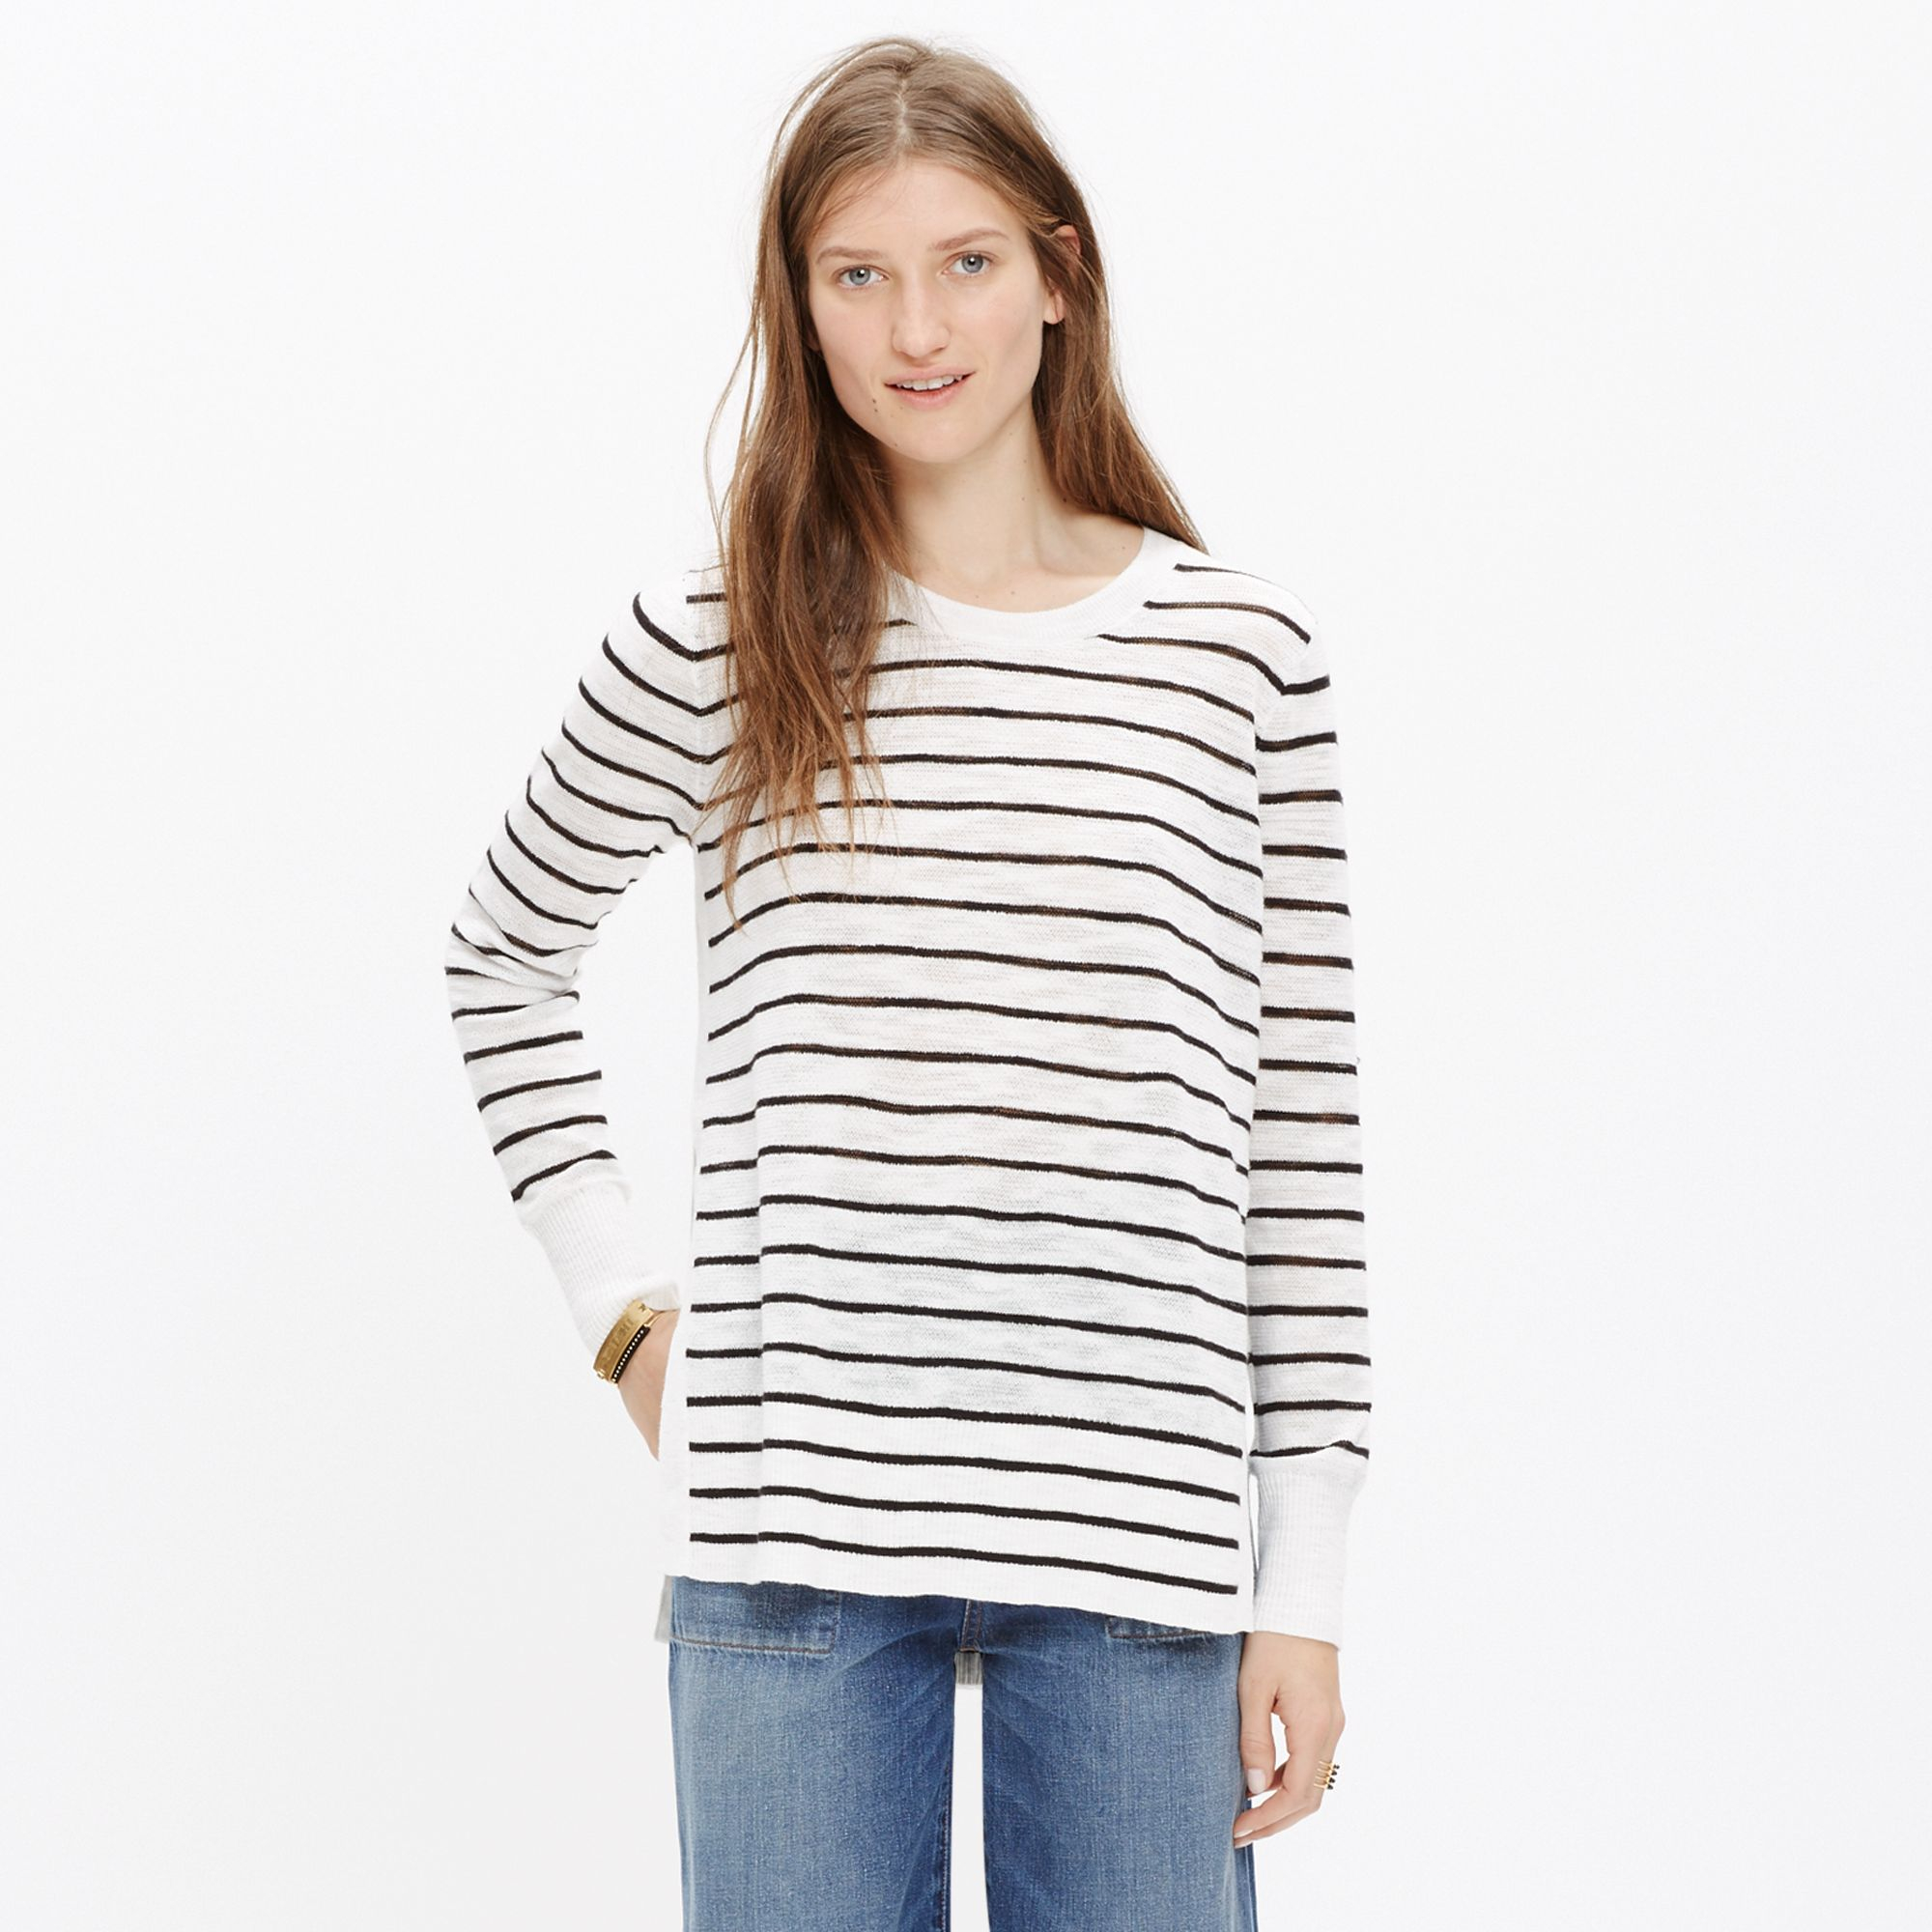 Lyst - Madewell Sunview Sweater In Stripe in Black